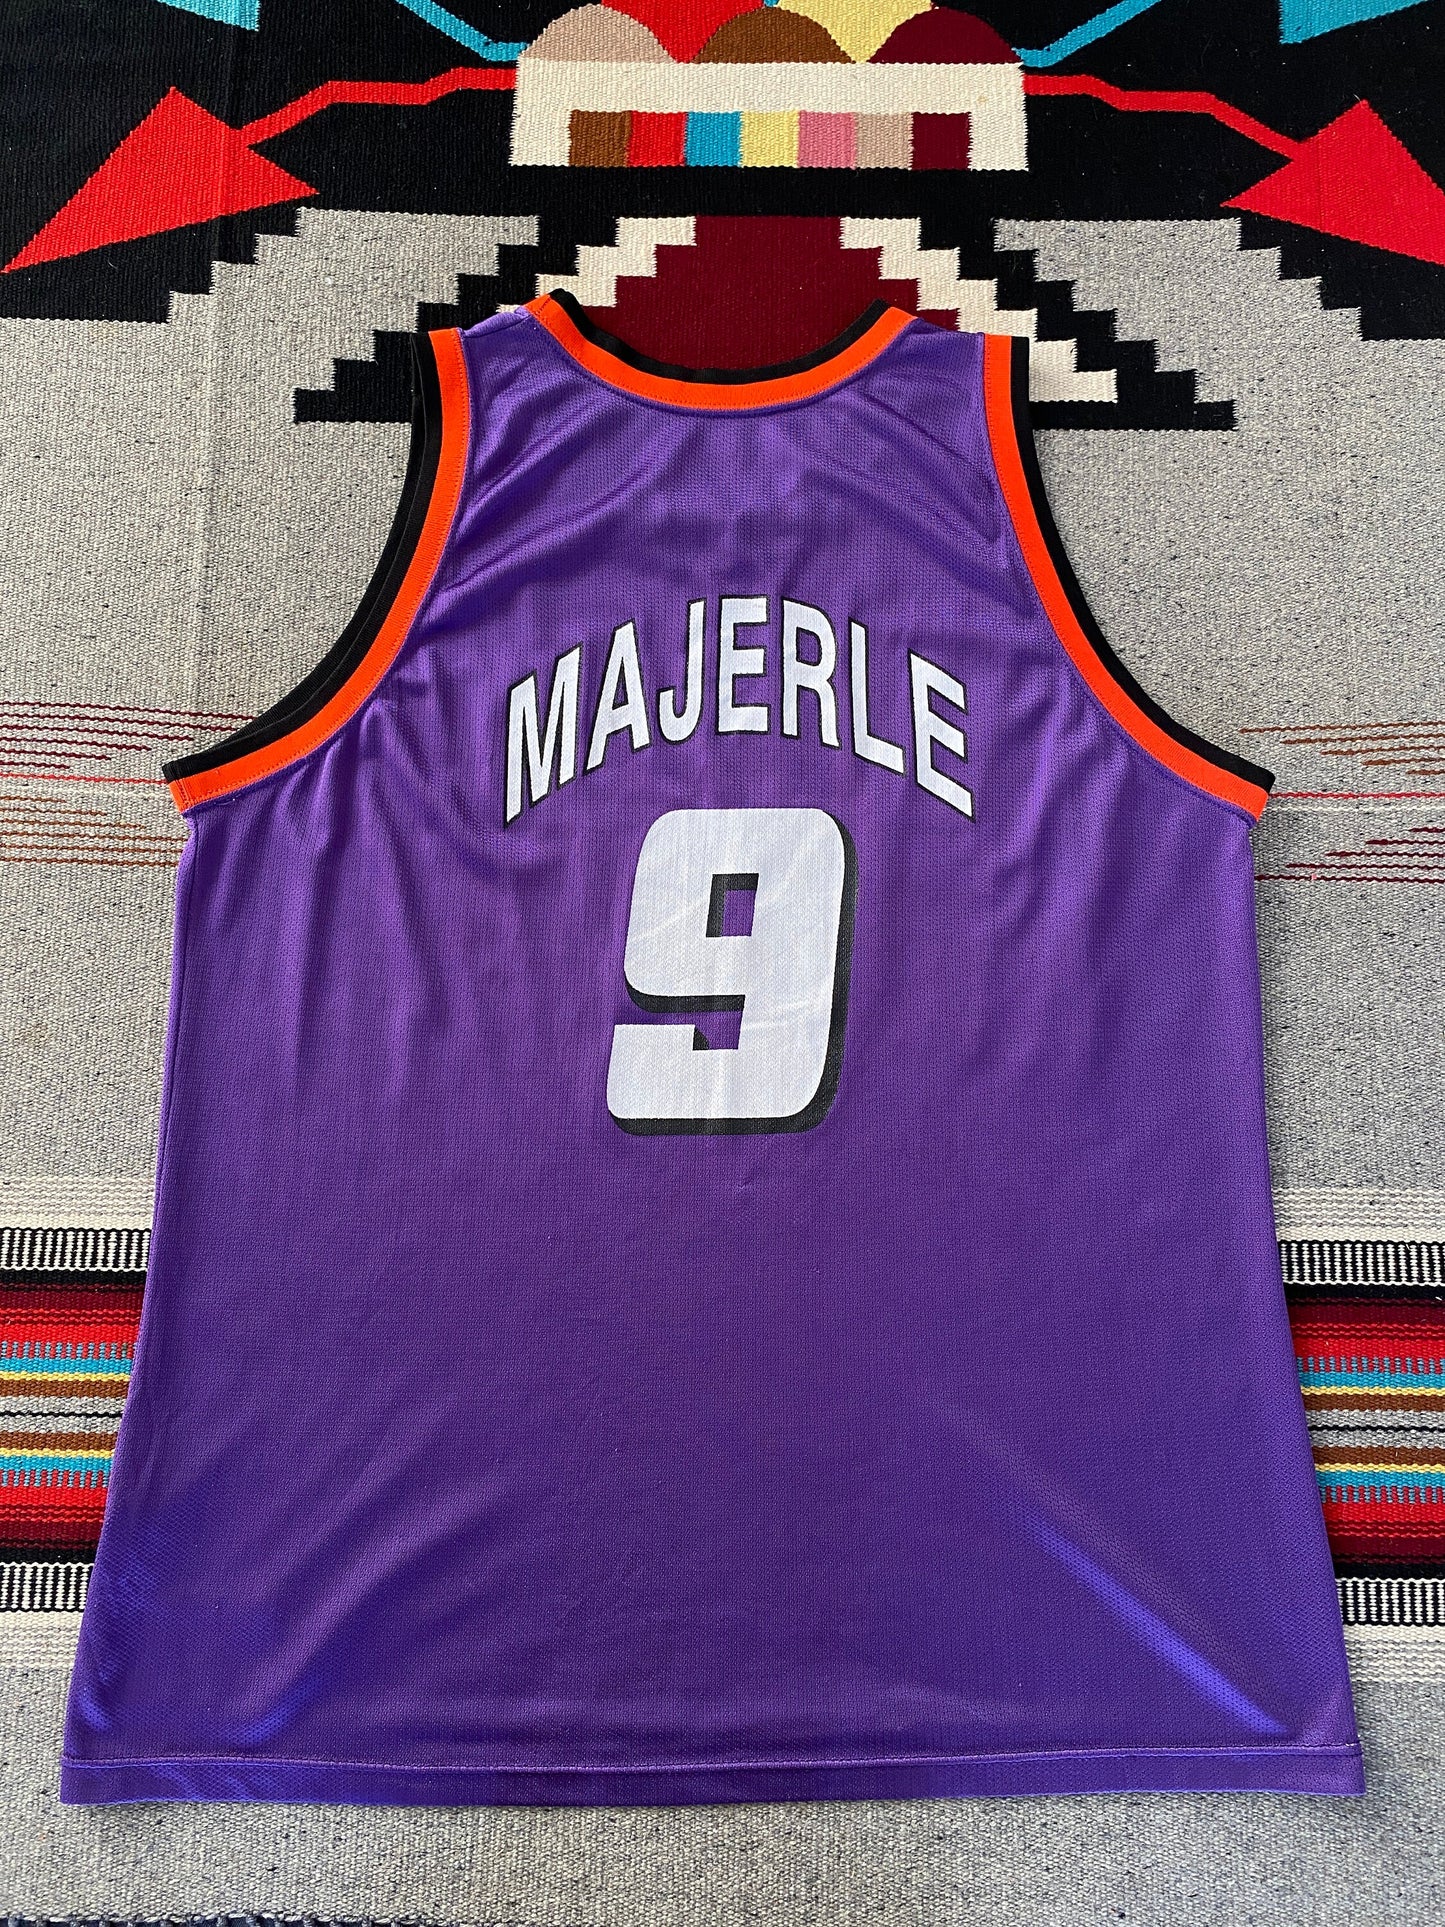 Vintage Suns NBA Jersey #9 Majerle - Size 48 | Made in USA by Champion